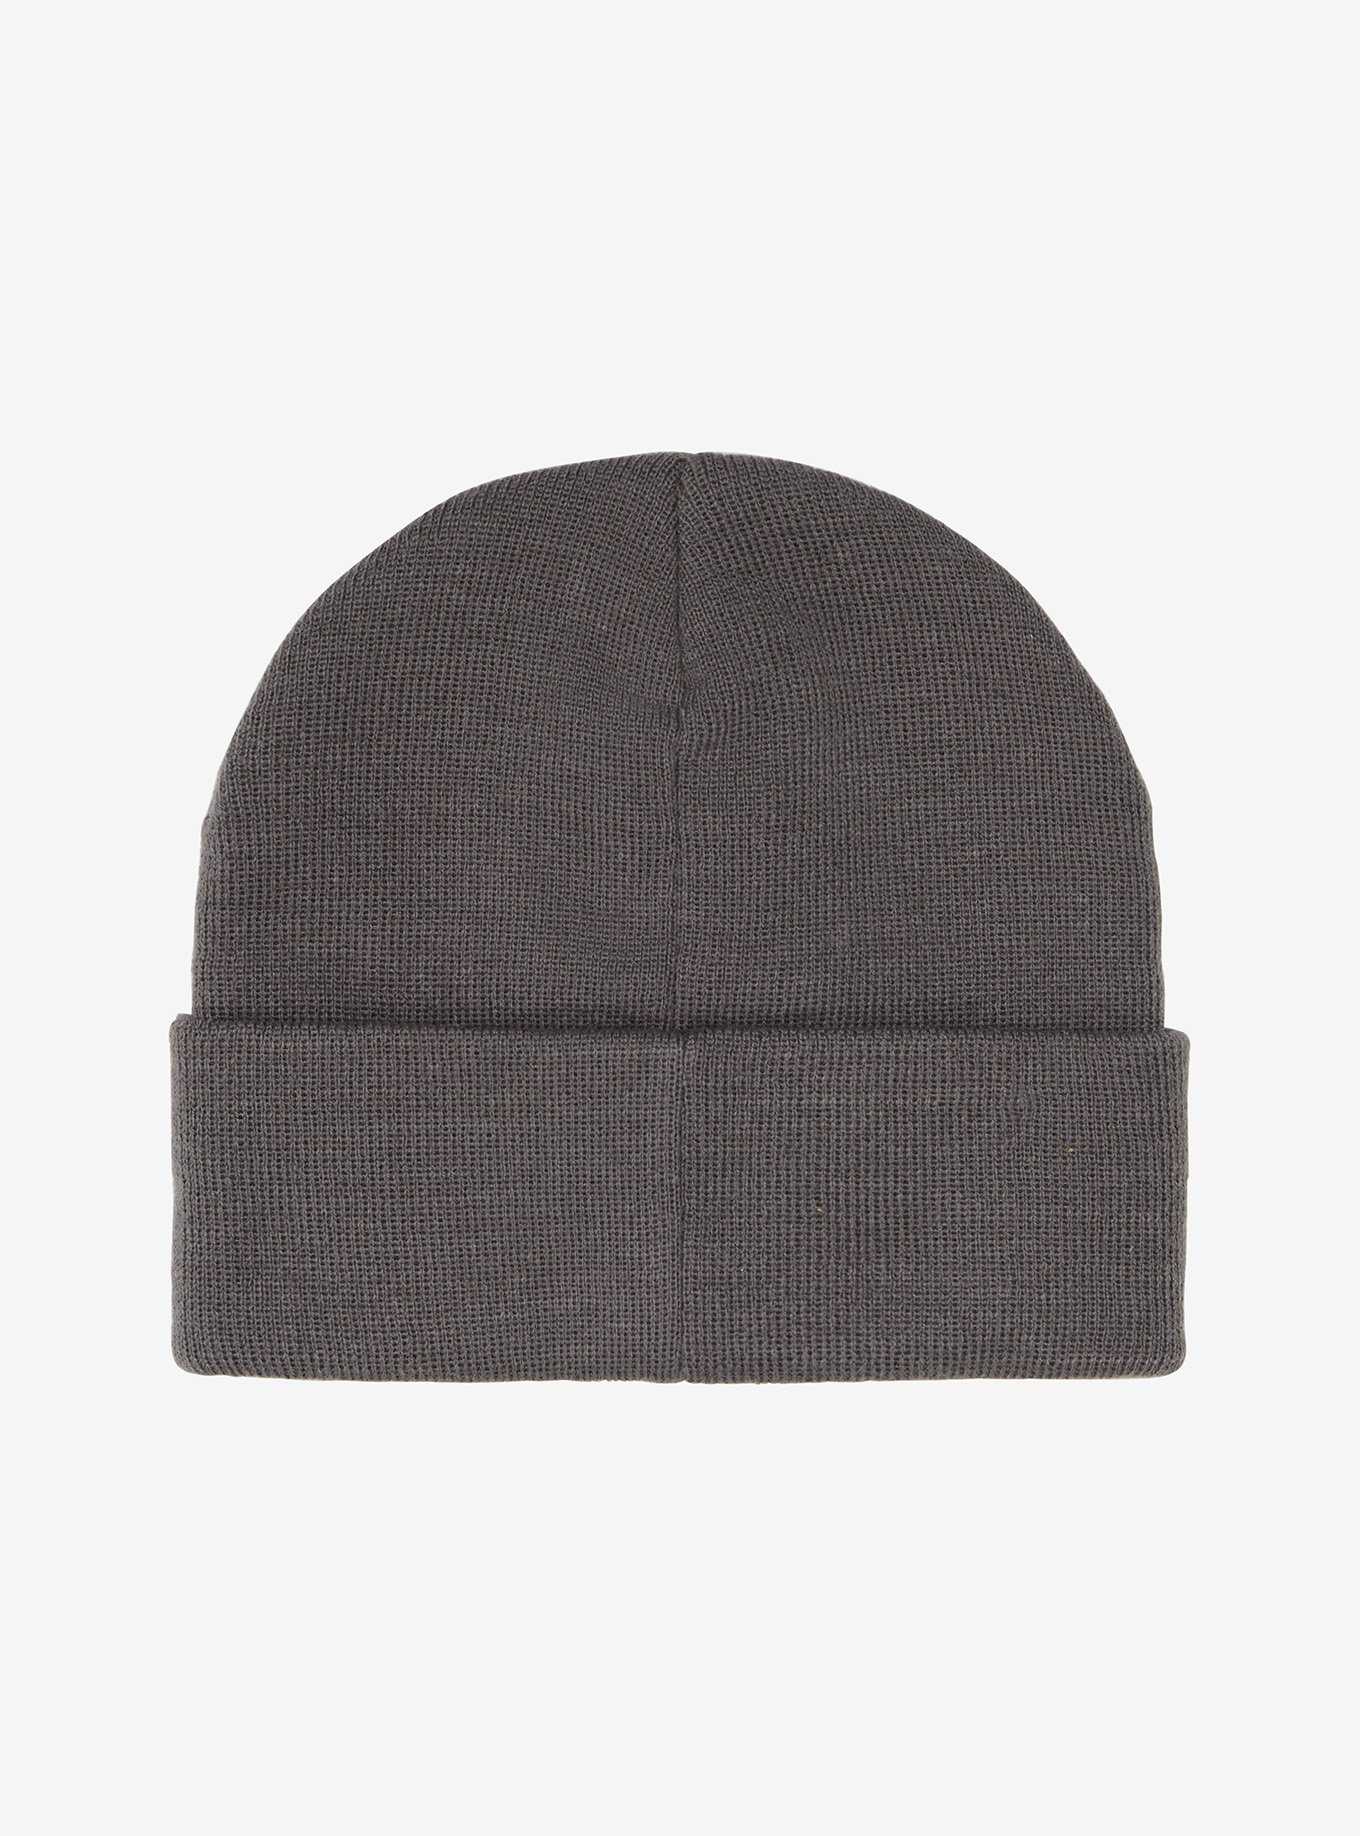 Cool Beanies: Slouchy, Trendy & BoxLunch Beanies Culture | Pop